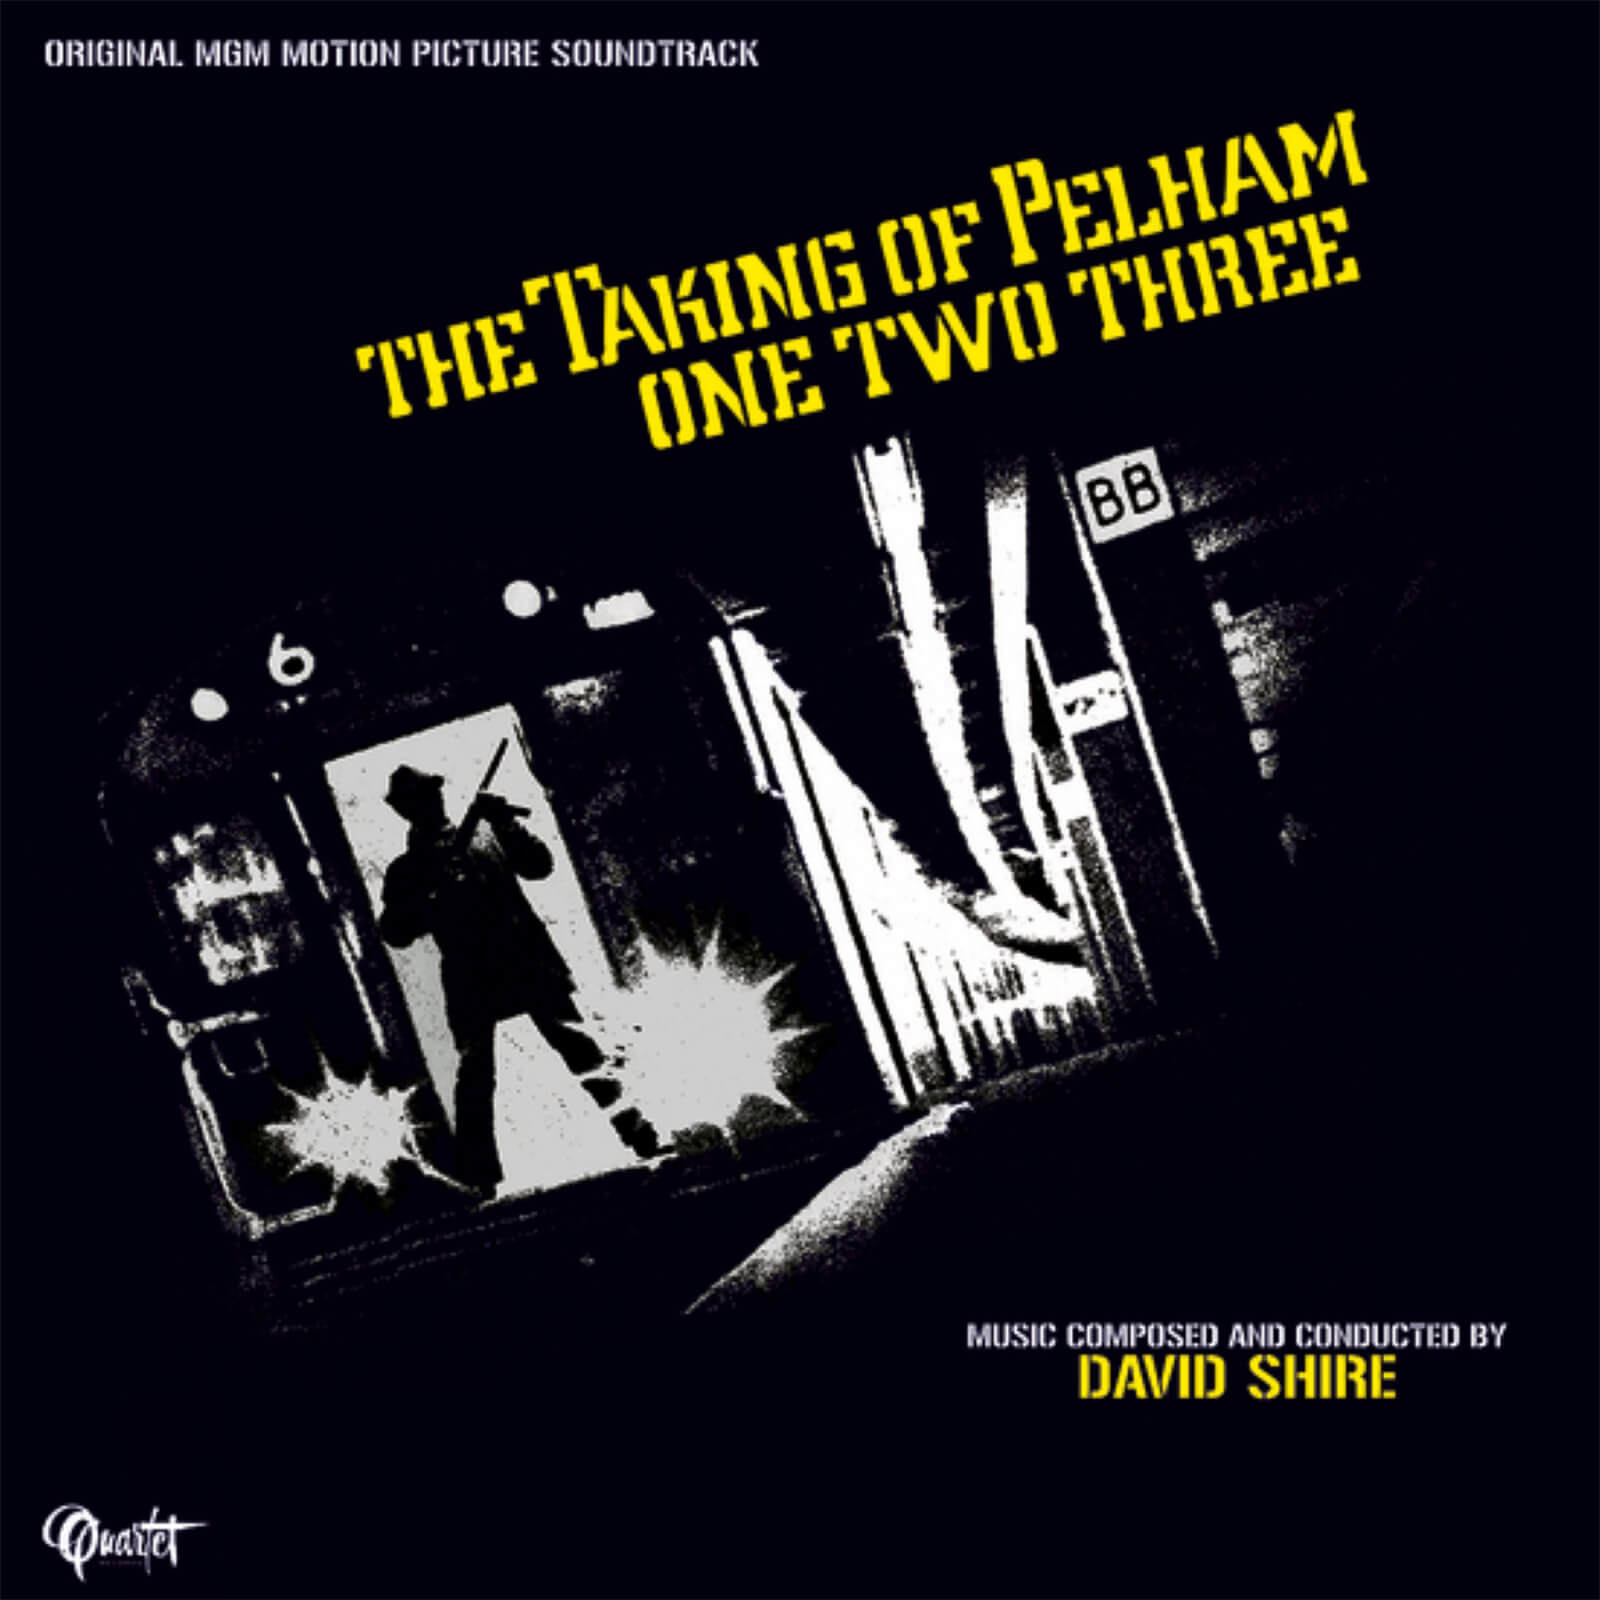 The Taking Of Pelham One Two Three (Original MGM Motion Picture Soundtrack) 180g LP